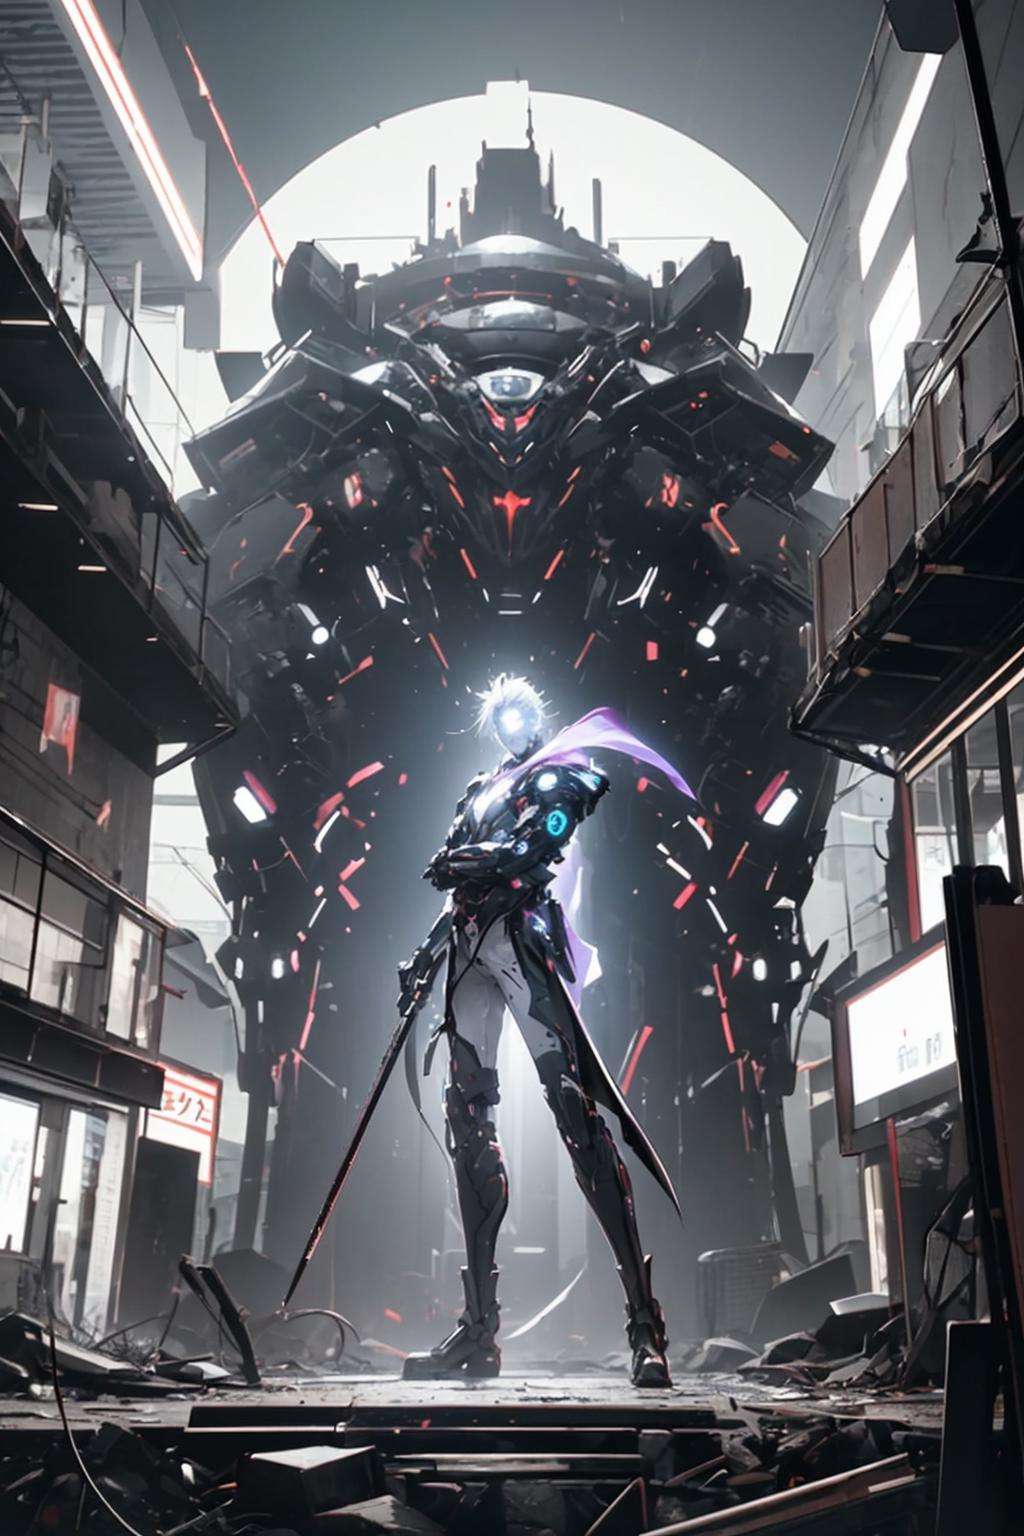 futubot, 8k resolution, depicting various poses and angles in a Japanese manga style, features a man in a standing pose with a robotic body and head, holding a samurai sword. The character is robust and the overall setting is in a cyberpunk, neon-lit metropolis with a dark cityscape  <lora:Futuristicbotv.2:0.7> 